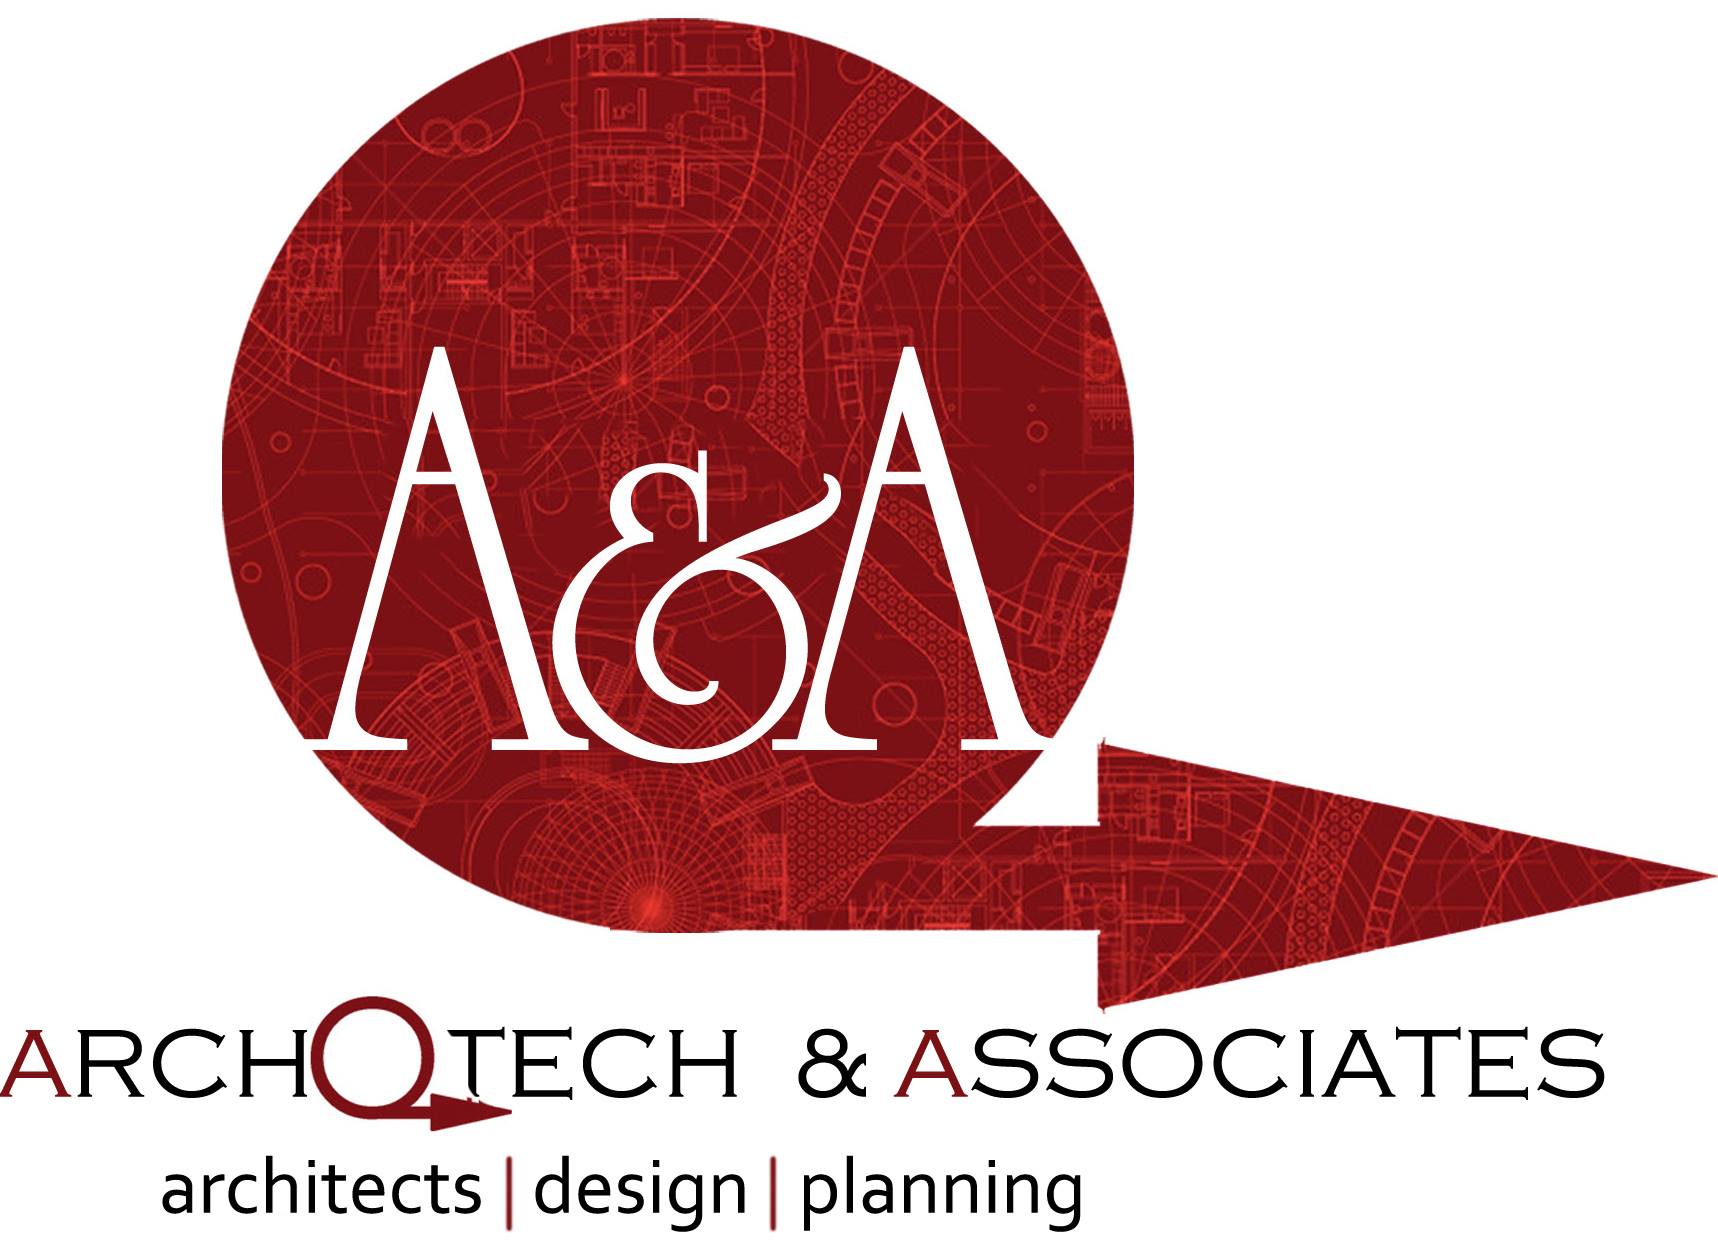 Archotech and associates (Architect)|Architect|Professional Services